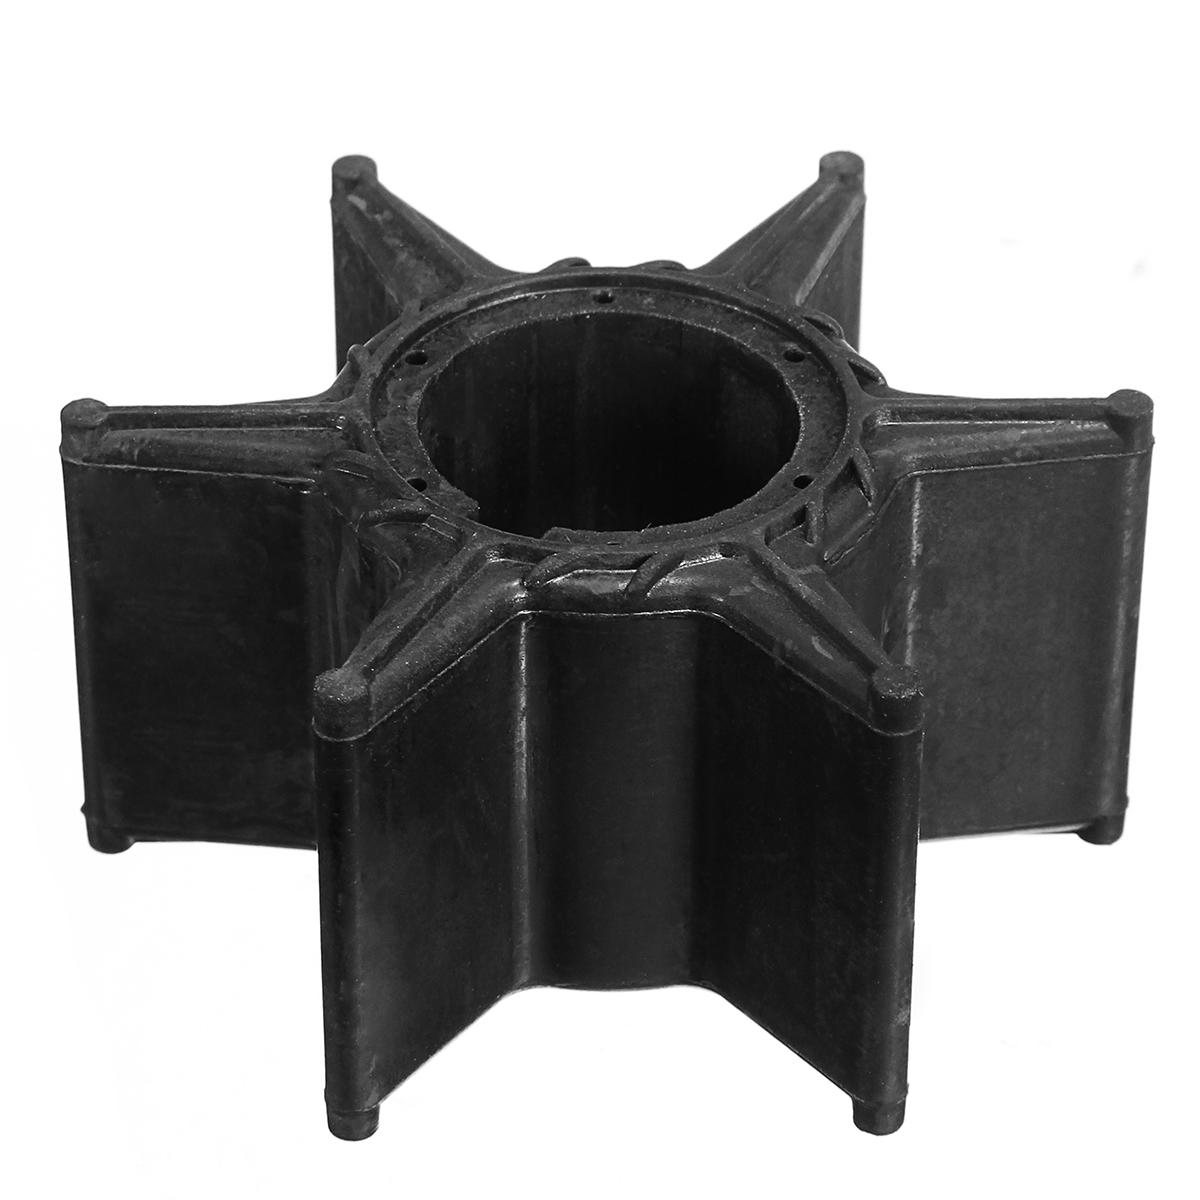 Water Pump Impeller For Yamaha 70HP 75HP 85HP 90HP Outboard 688-44352-03 18-3070